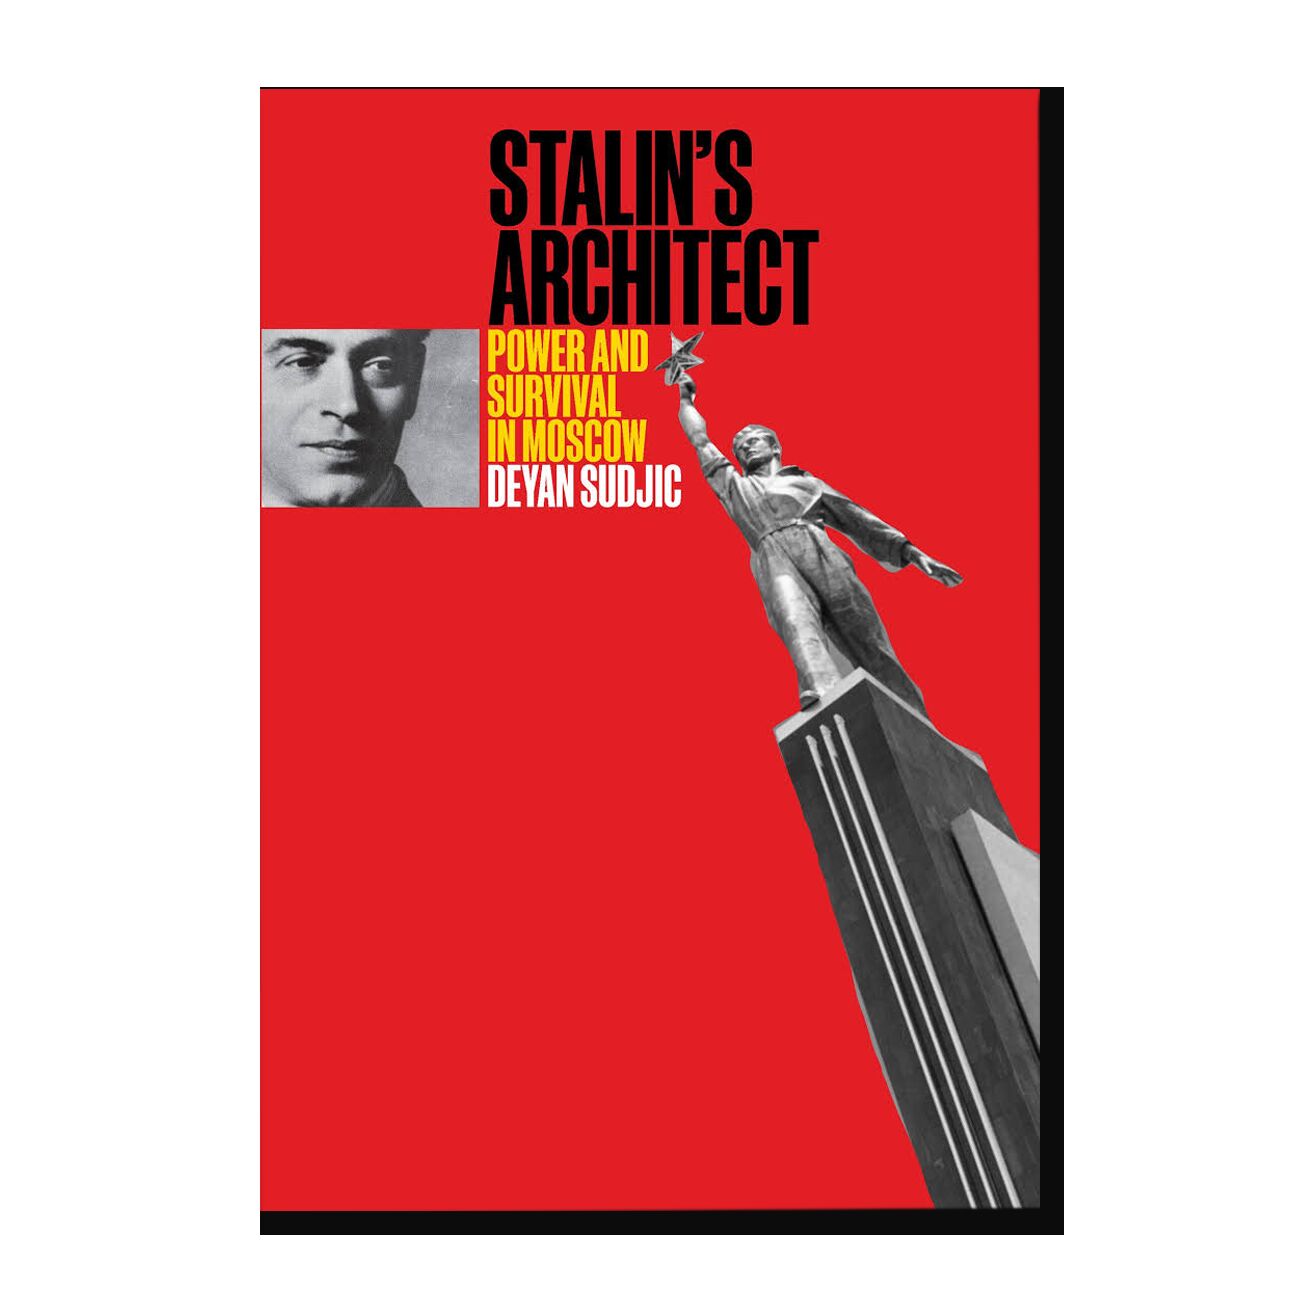 Stalin's Architect. Power and Survival in Moscow